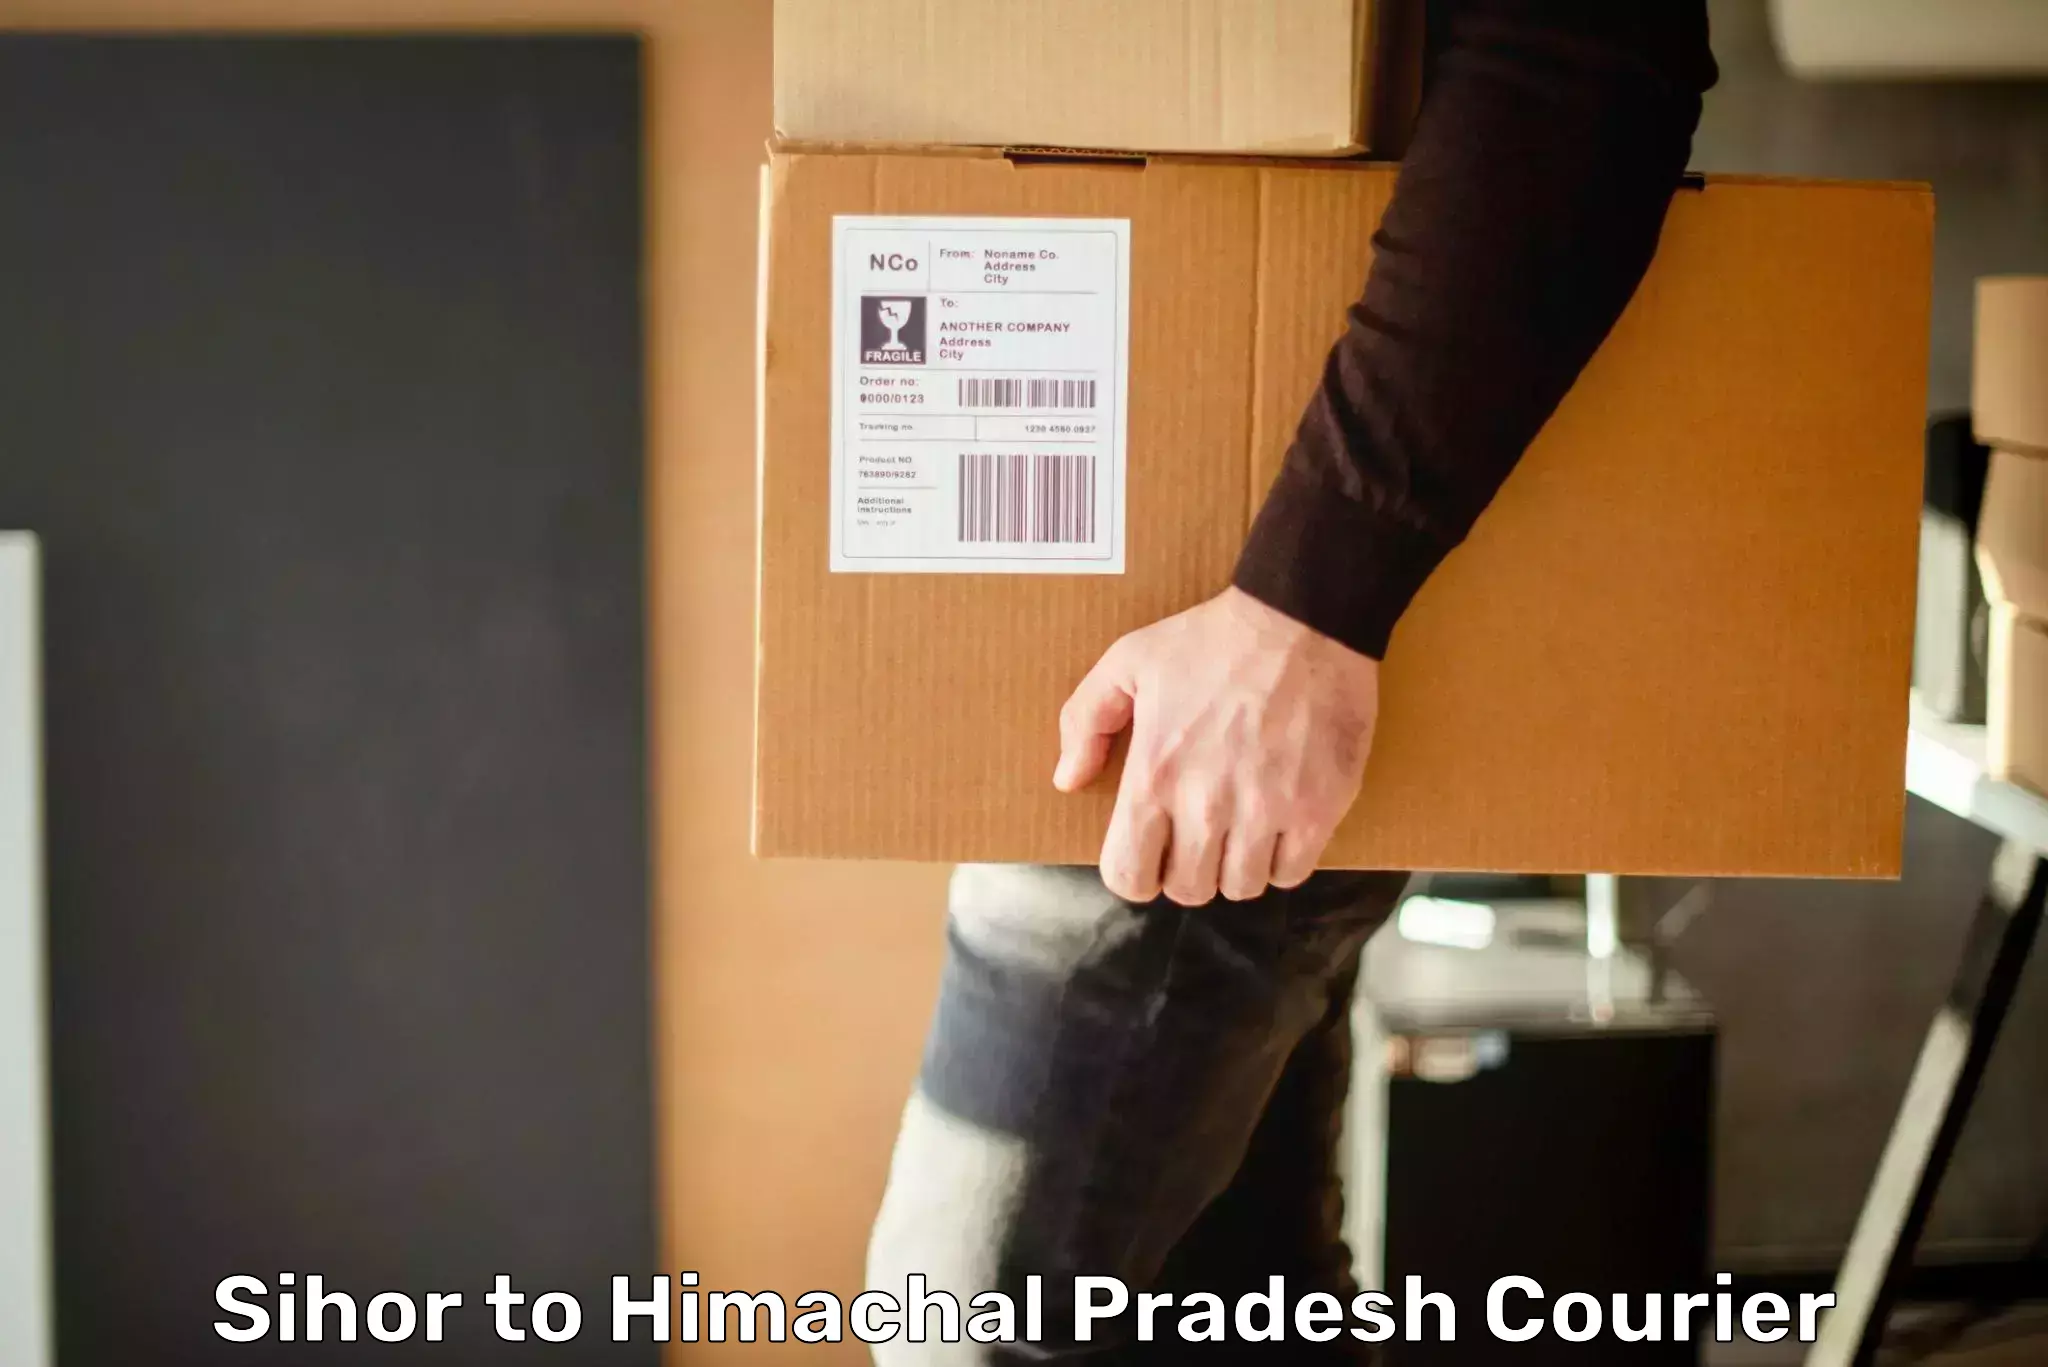 State-of-the-art courier technology Sihor to Himachal Pradesh